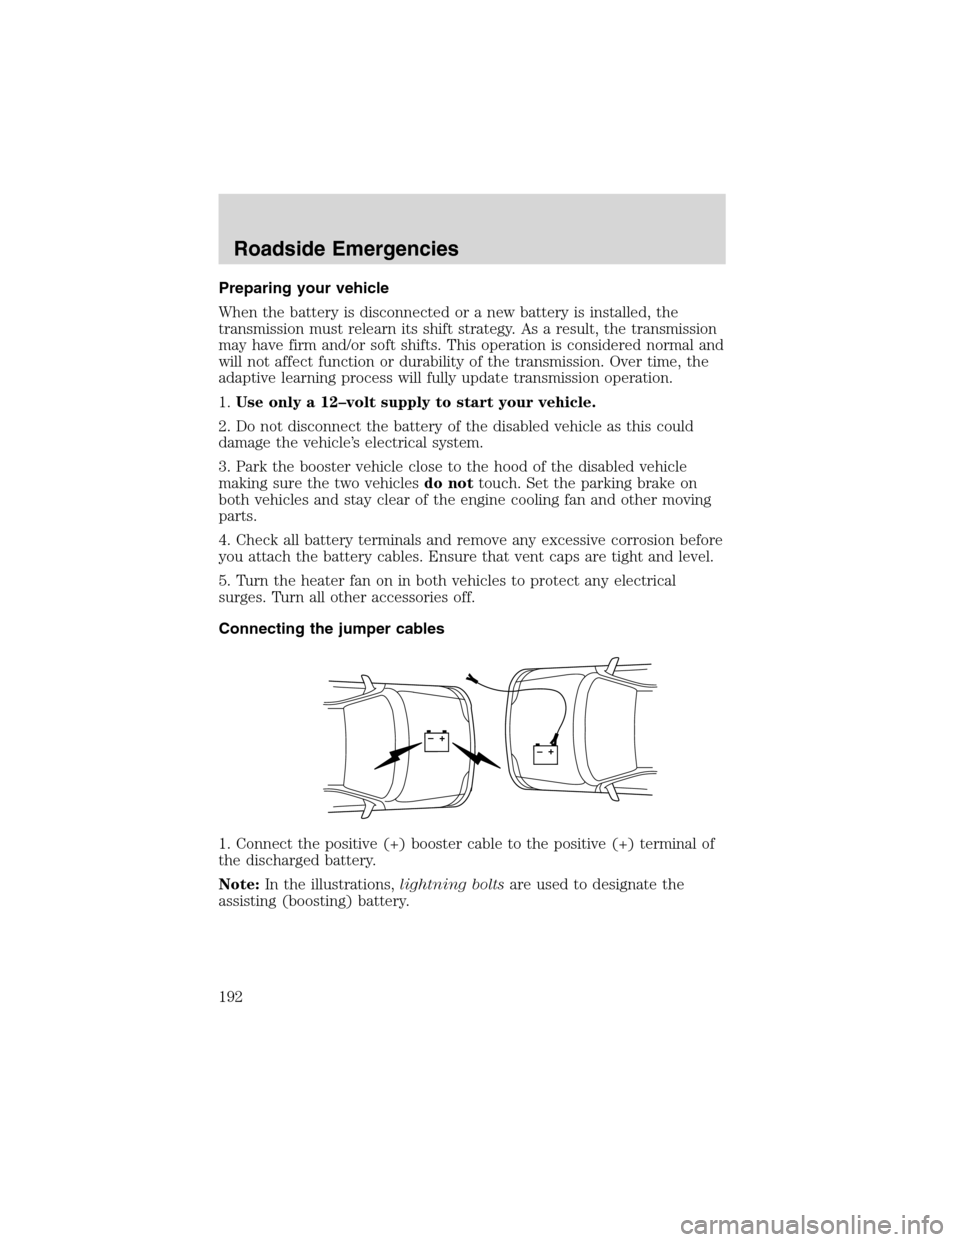 LINCOLN BLACKWOOD 2003  Owners Manual Preparing your vehicle
When the battery is disconnected or a new battery is installed, the
transmission must relearn its shift strategy. As a result, the transmission
may have firm and/or soft shifts.